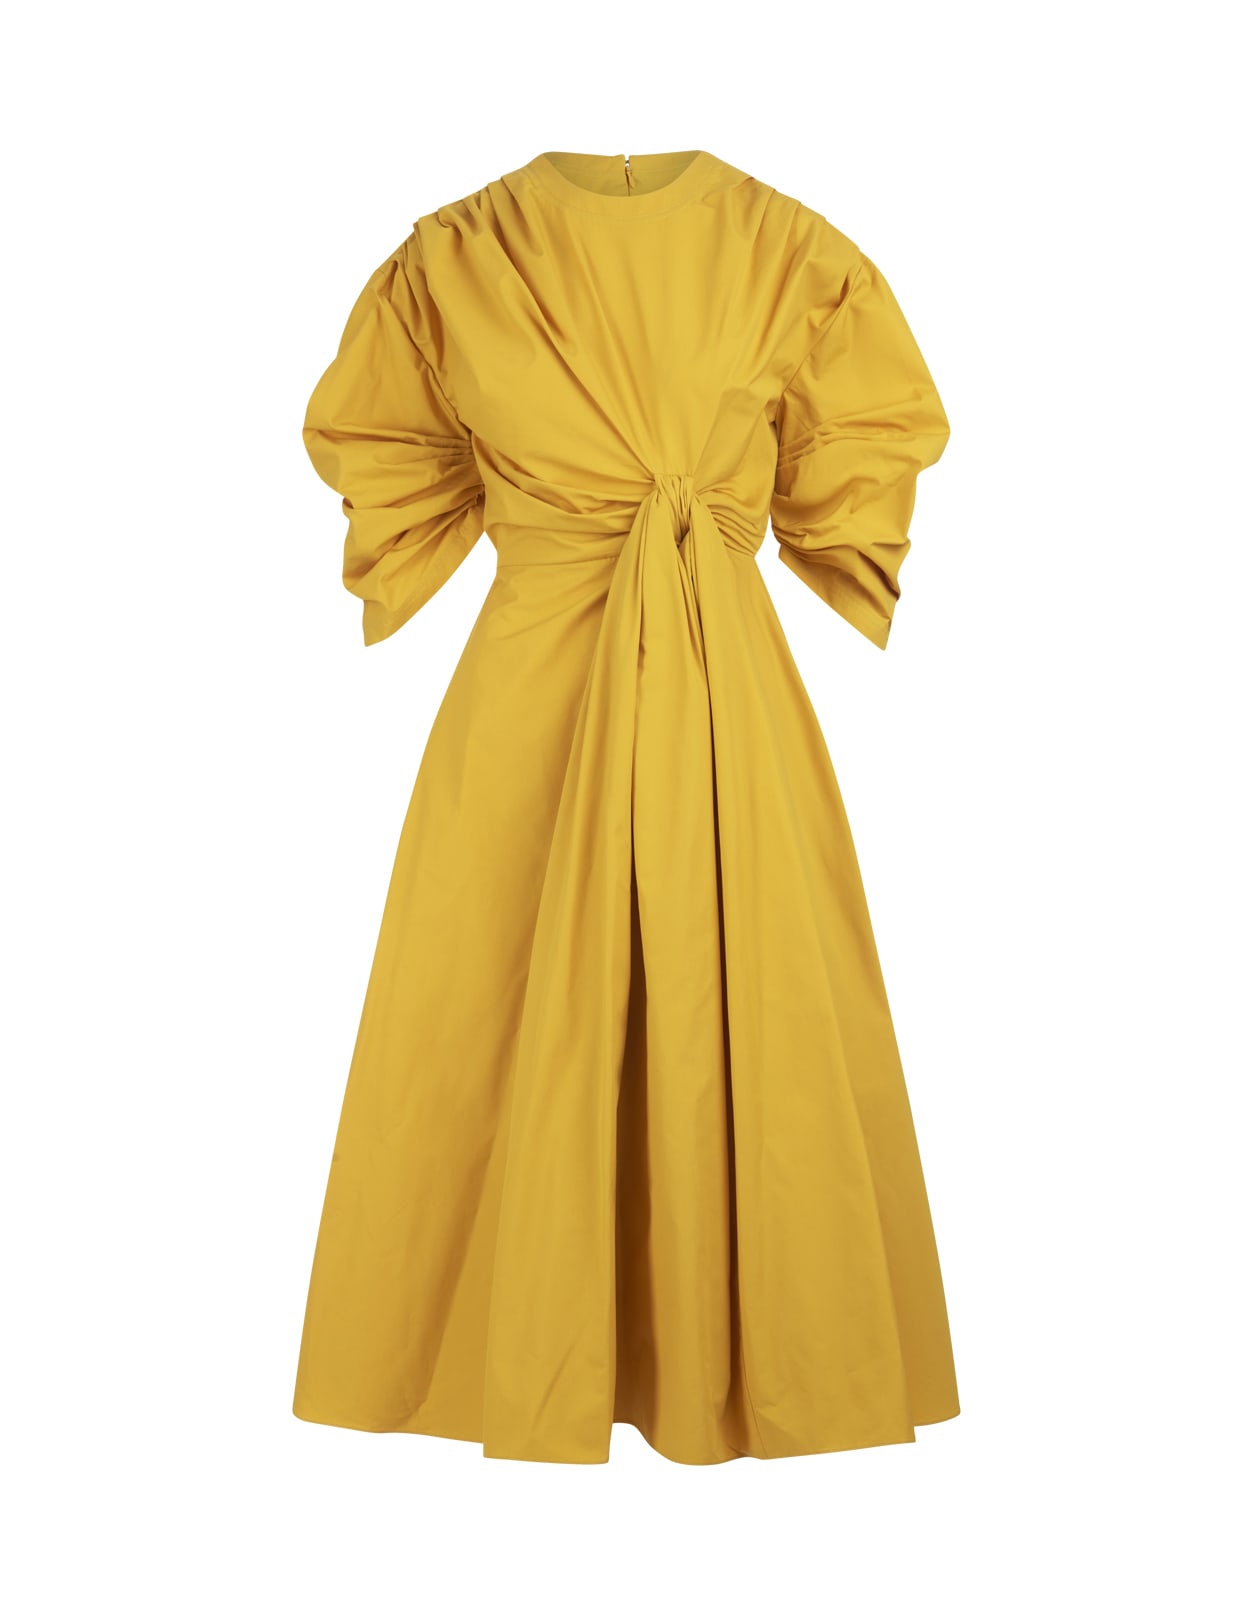 Alexander McQueen Pop Yellow Cotton Poplin Midi Dress With Knotted Draping